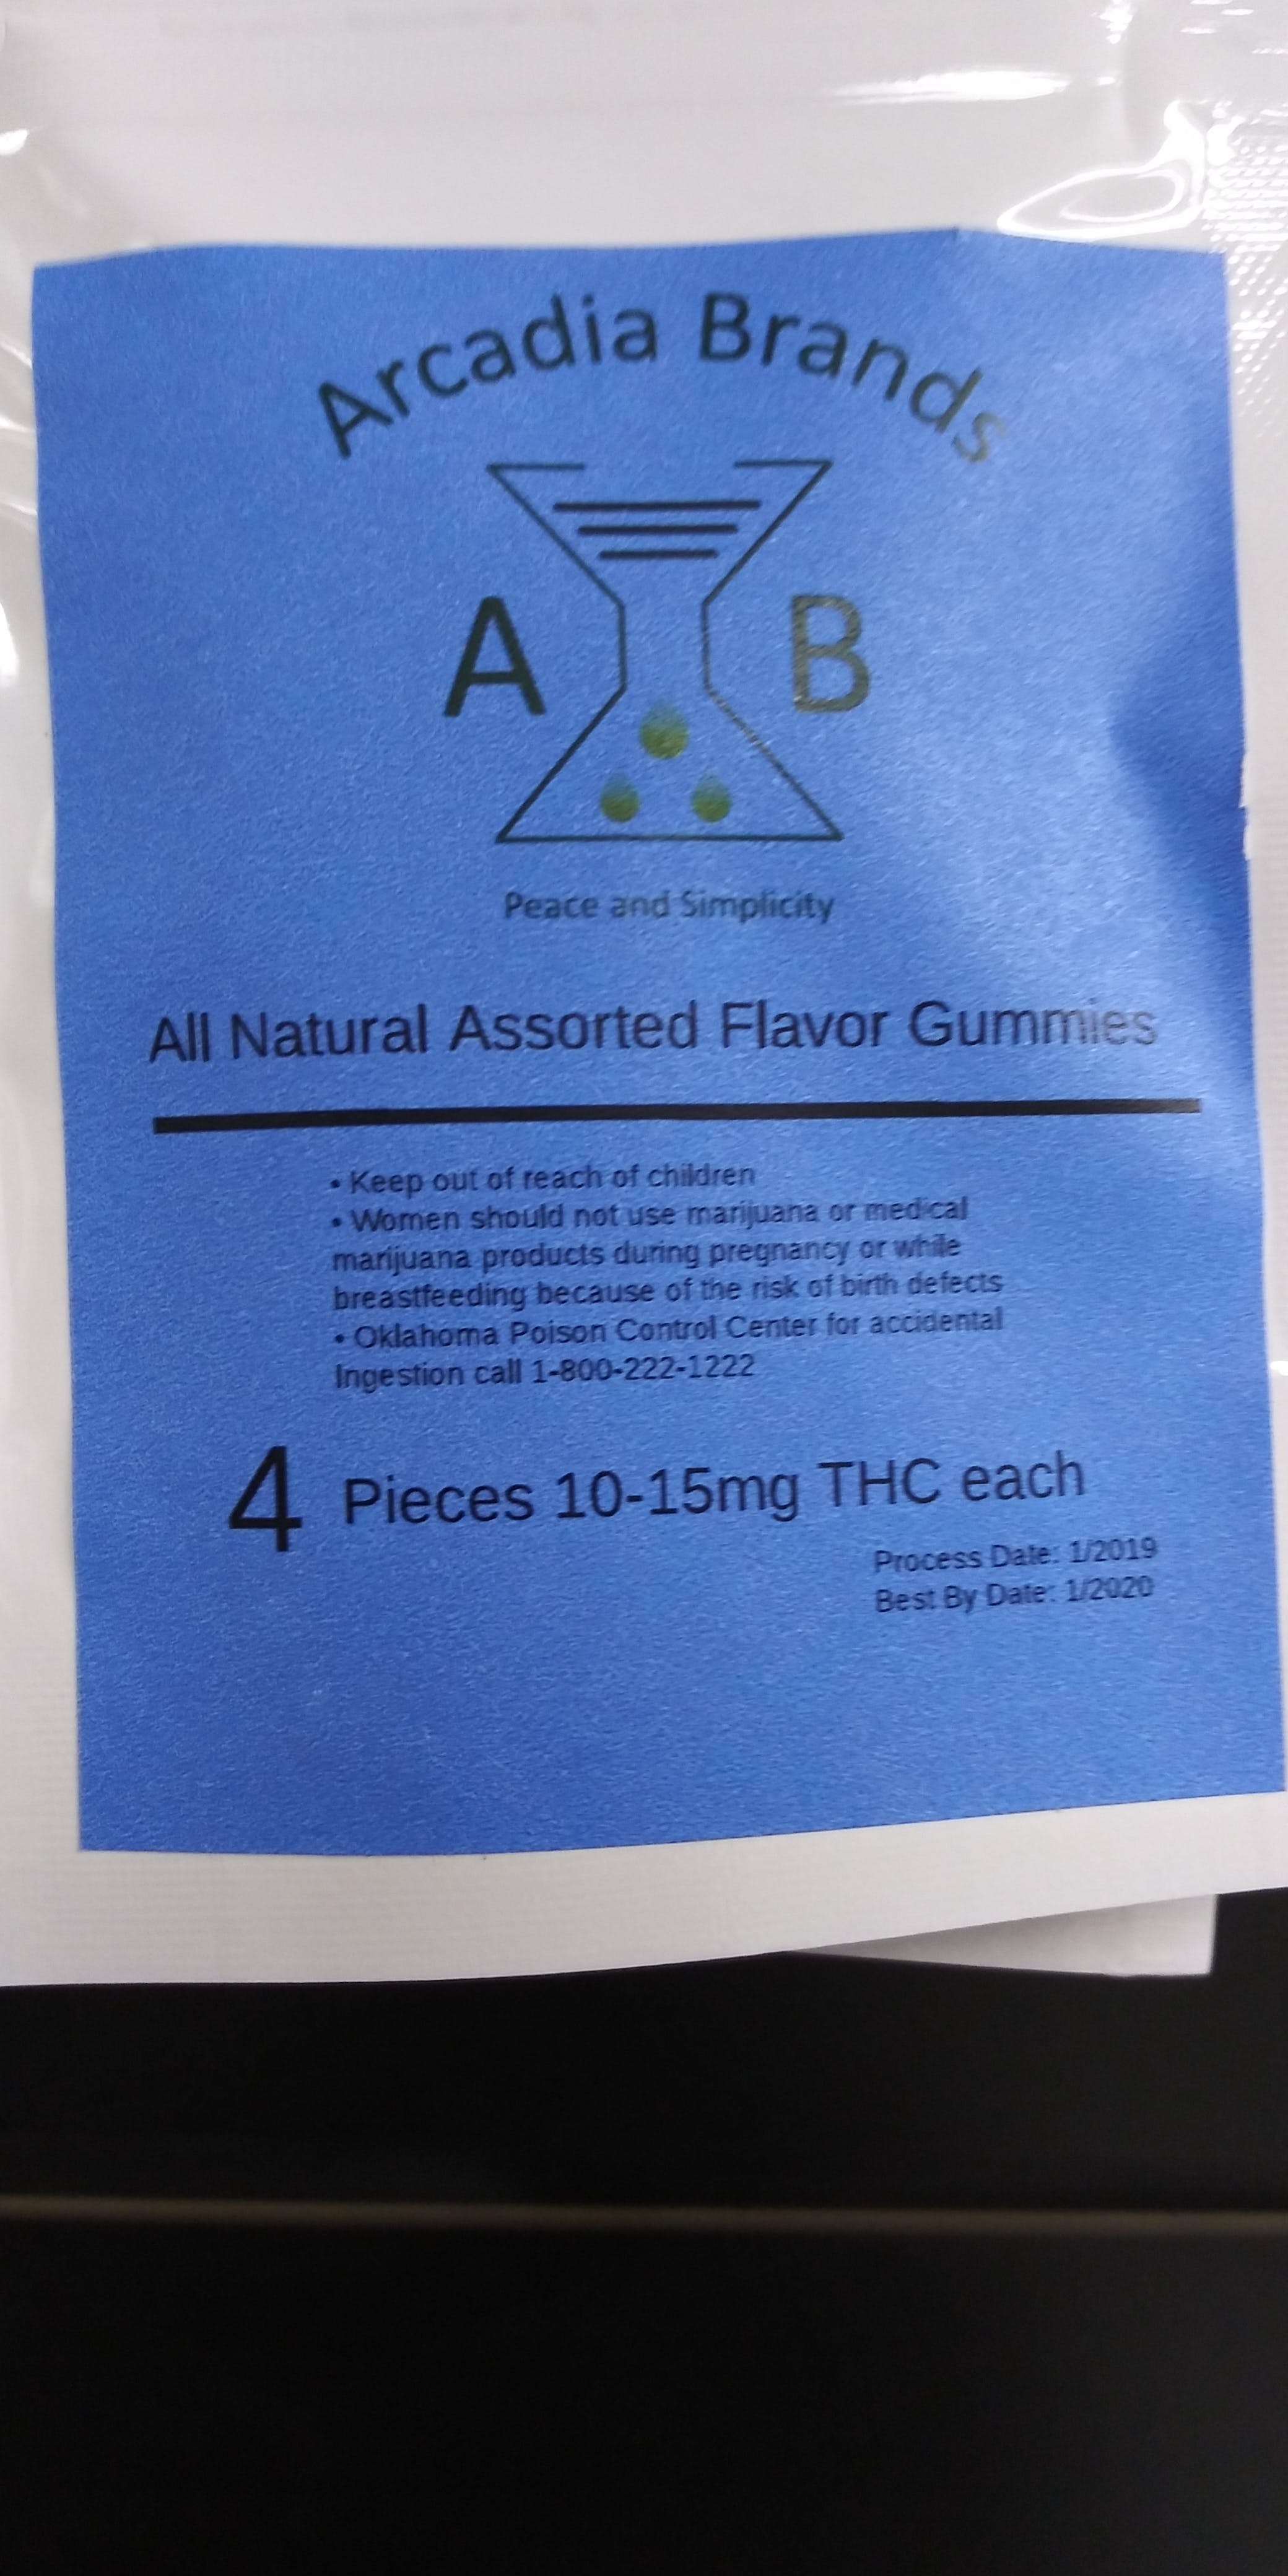 edible-all-natural-assorted-flavor-gummies-4-pieces-10-15mg-thc-each